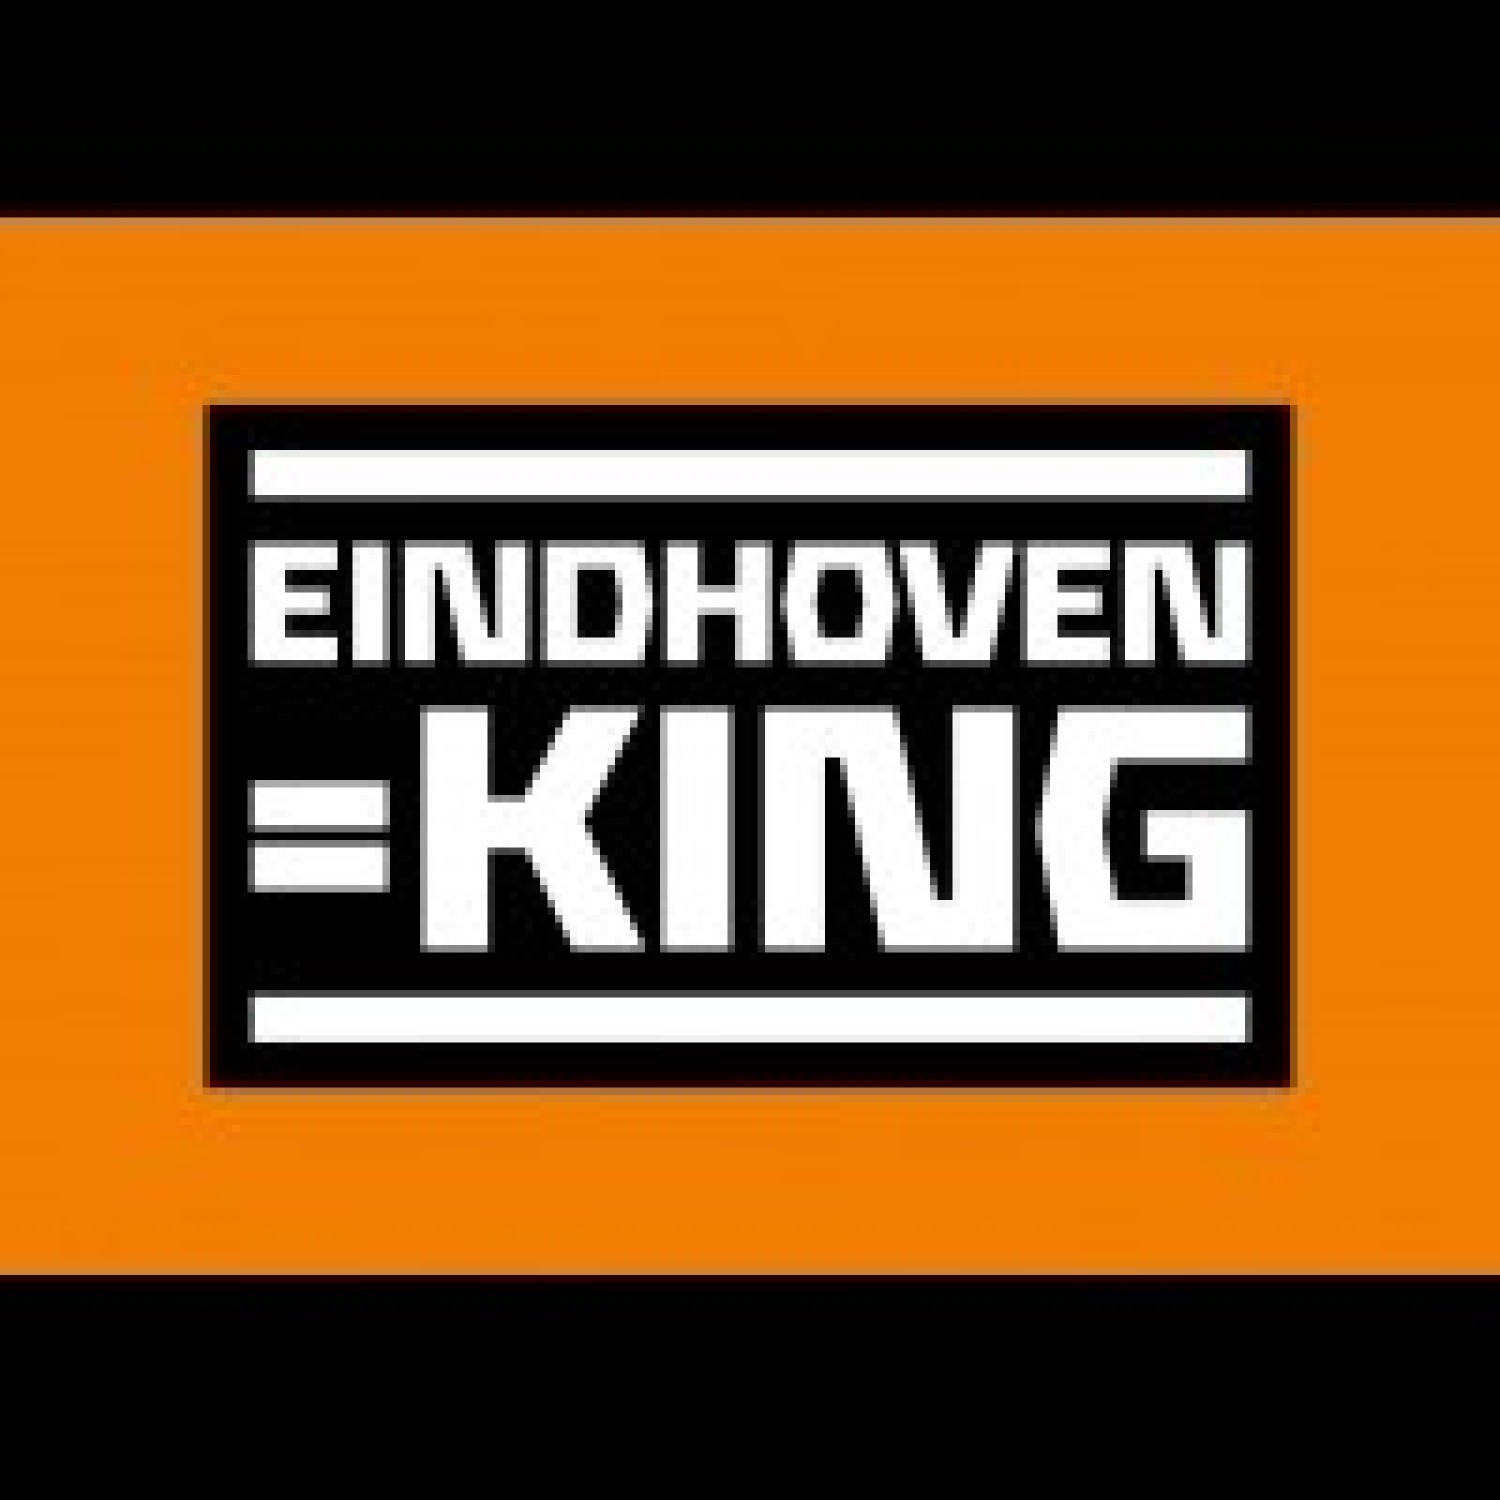 Eindhoven is King